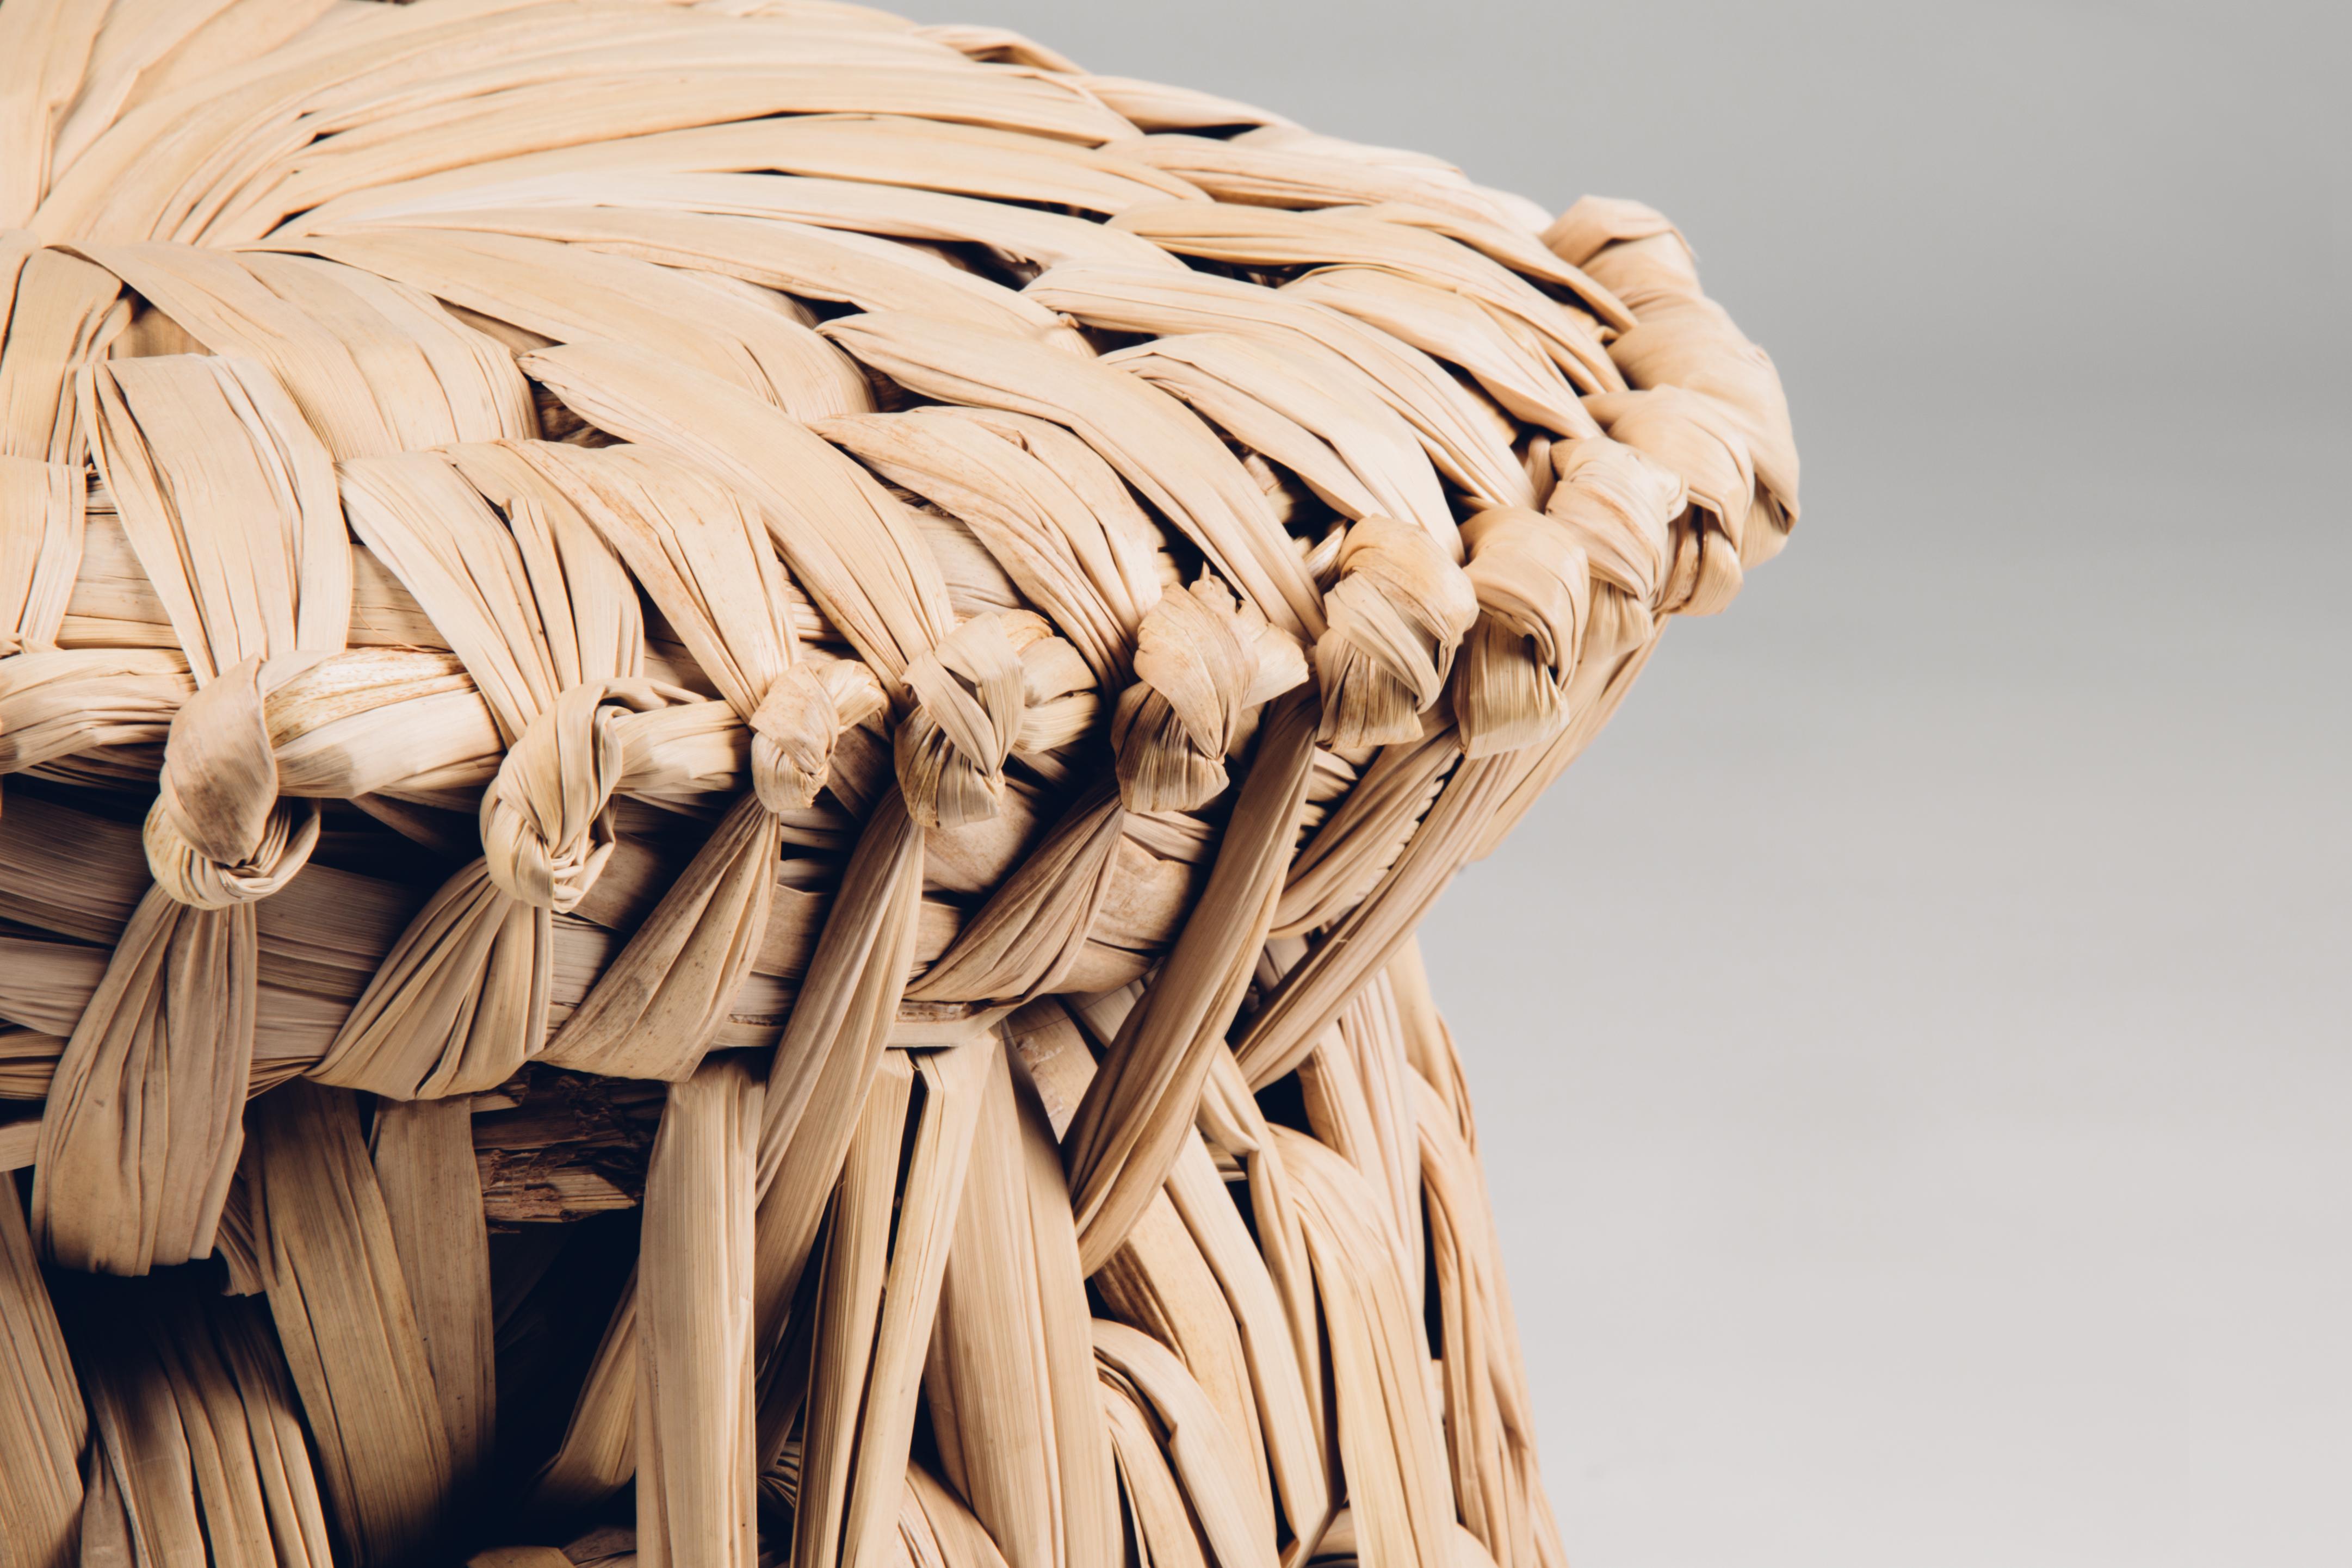 Contemporary Handwoven Palm 'Icpalli' Stool, Made in Mexico by Luteca